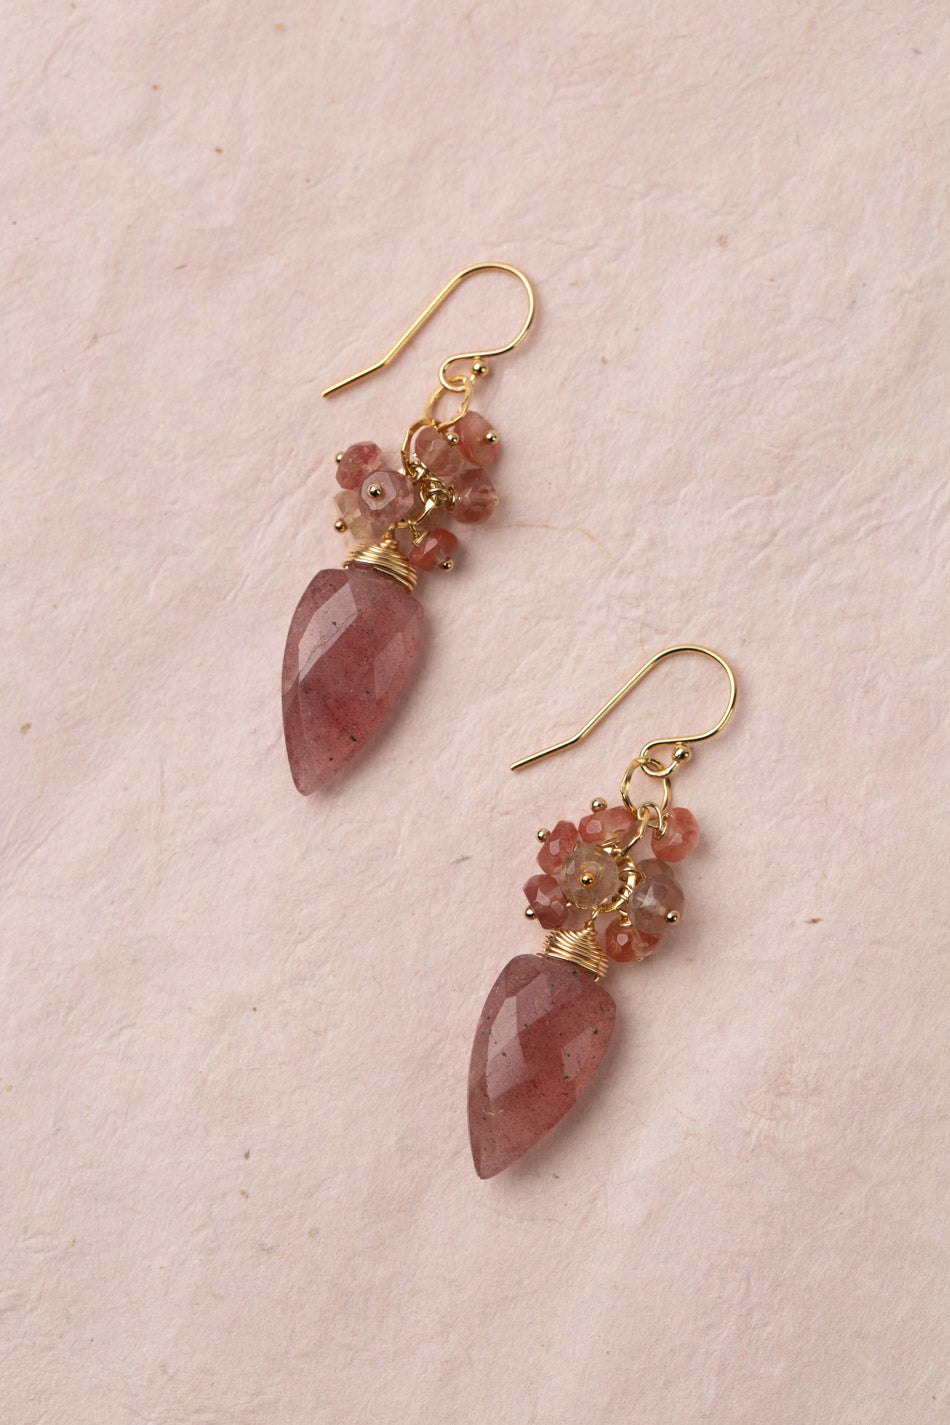 Divinity Andesine With Strawberry Quartz Arrowhead Shaped Briolette Cluster Earrings